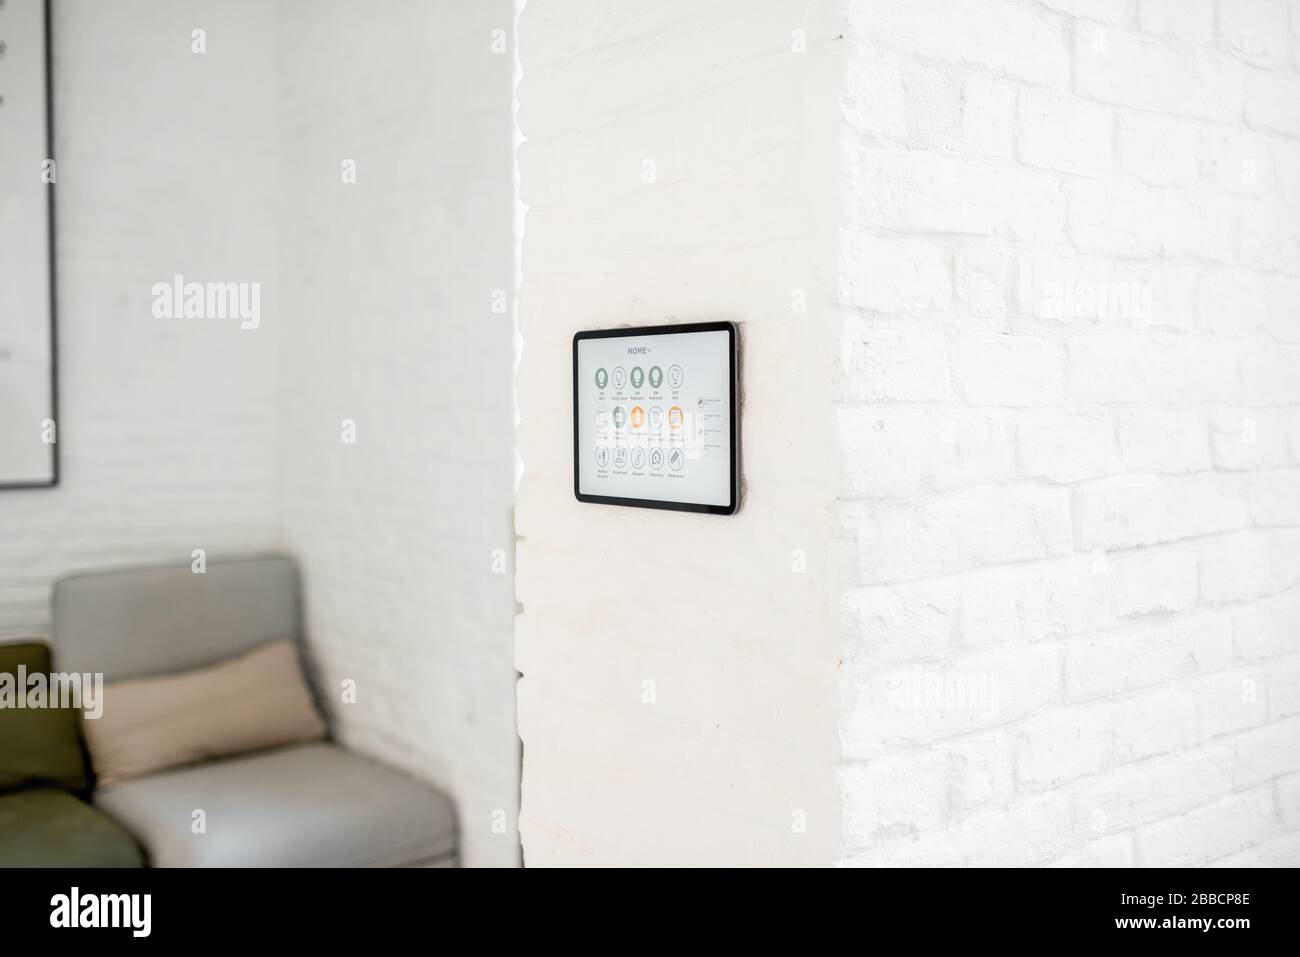 Touch screen panel with launched smart home software installed on the wall in the living room Stock Photo